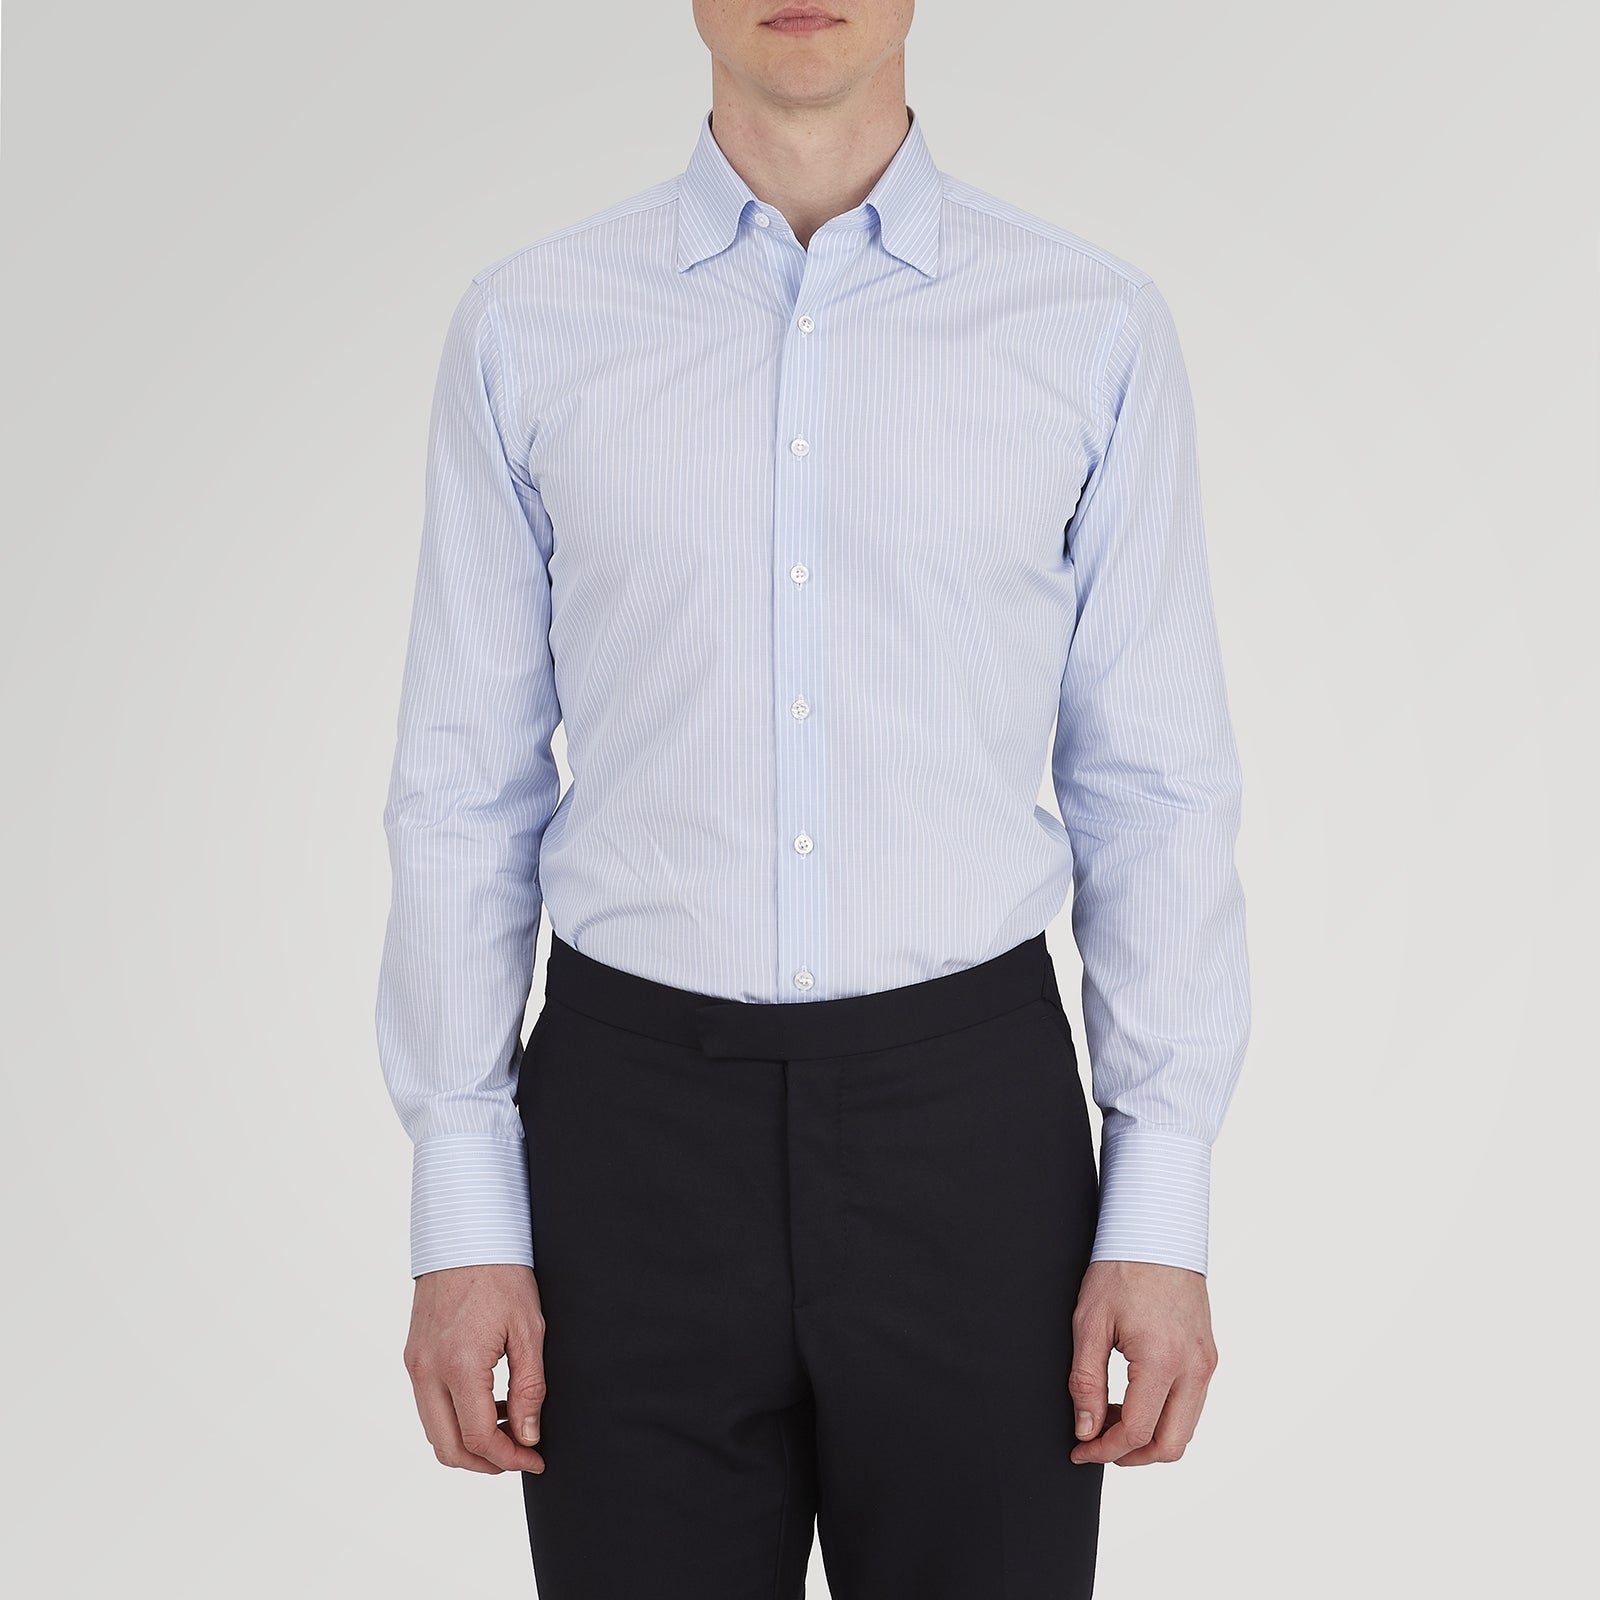 Tailored Fit Light Blue and White Pinstripe Shirt with Bury Collar and 3-Button Cuffs